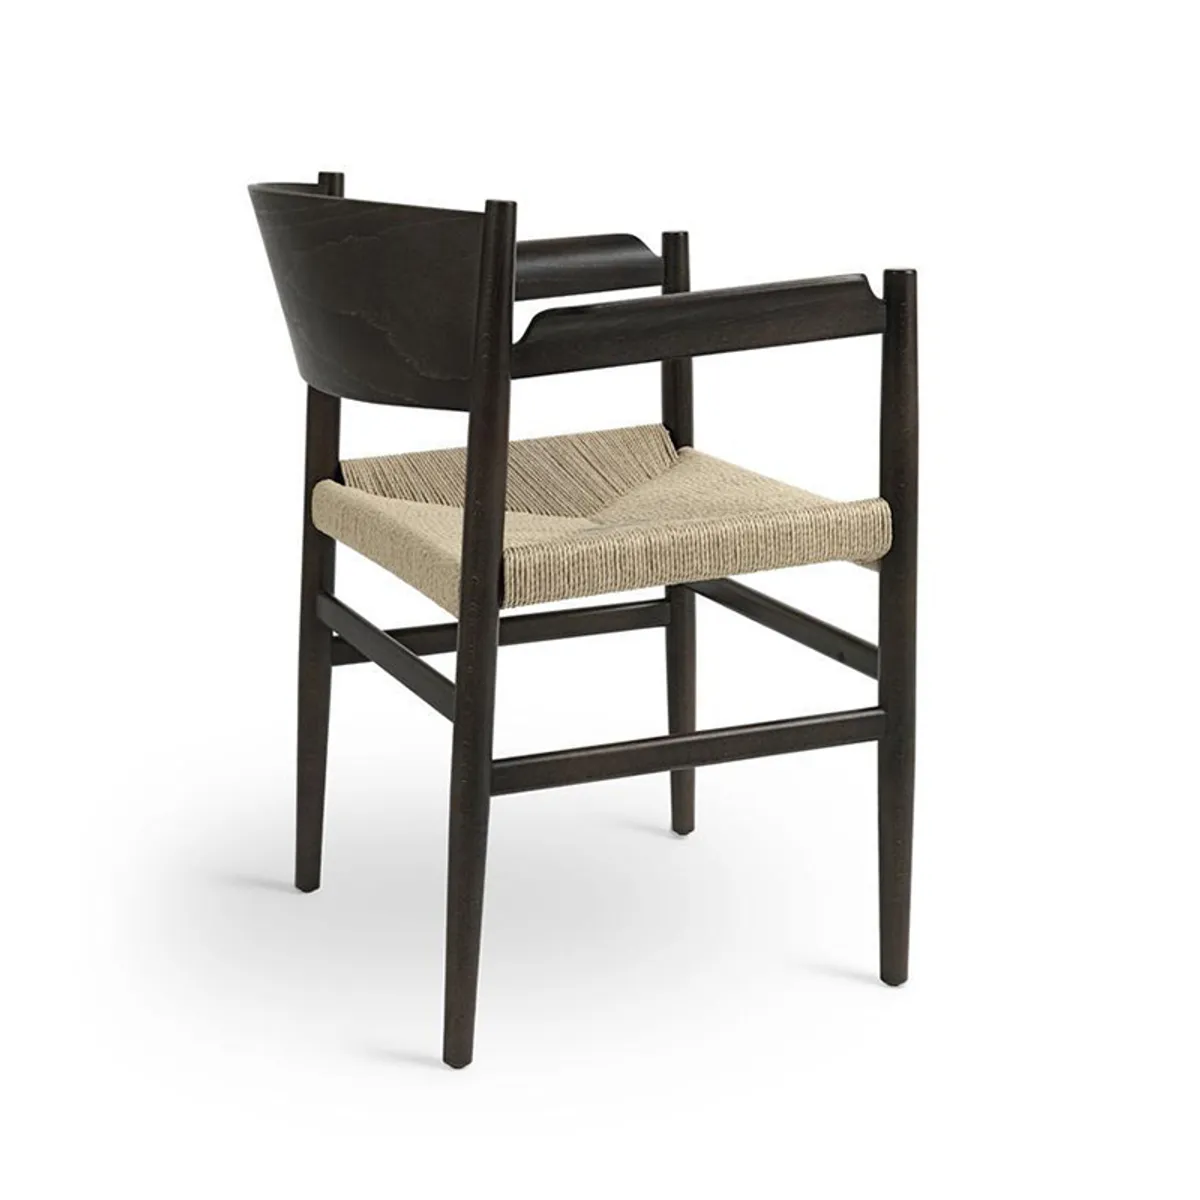 Nestor Armchair Sustainable Furniture In Dark Finish Inside Out Contracts